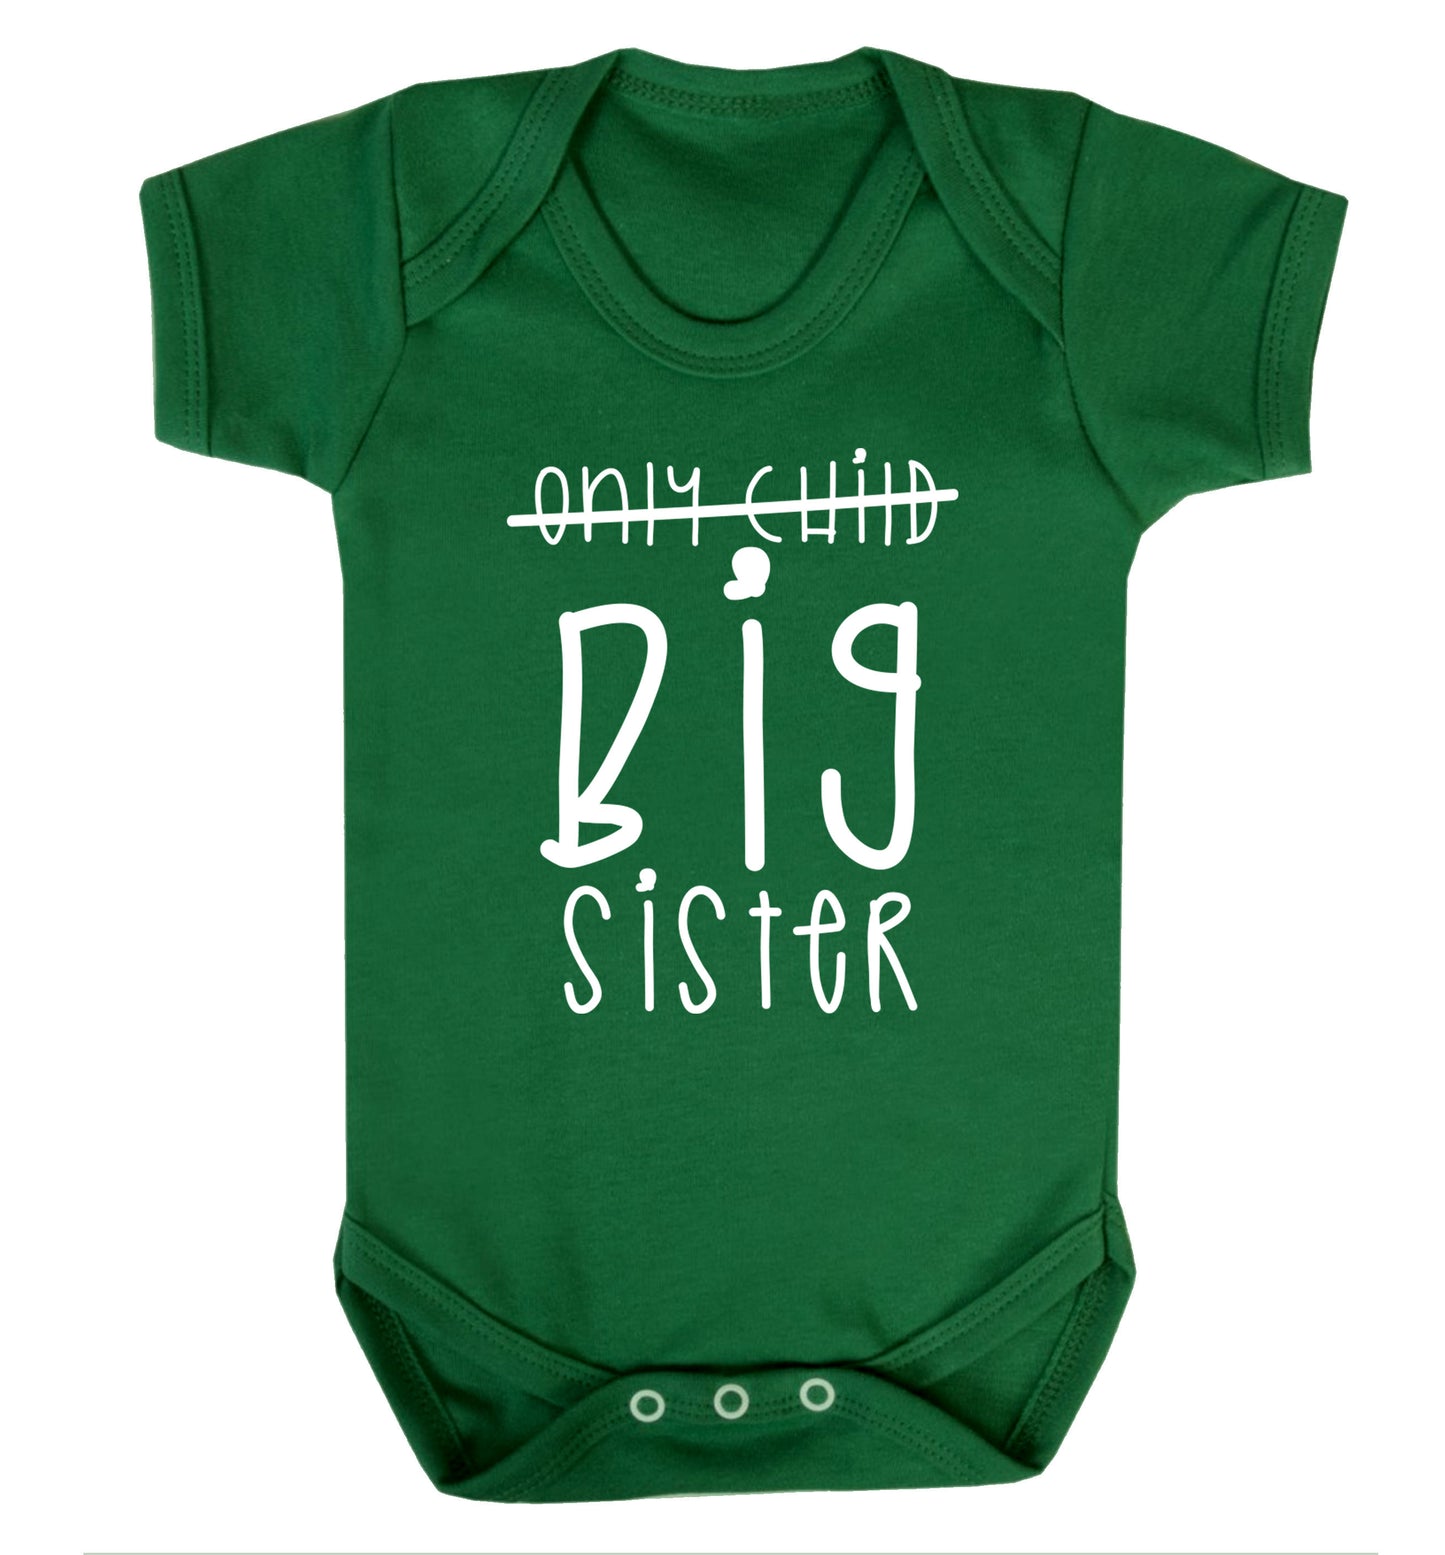 Only child big sister Baby Vest green 18-24 months